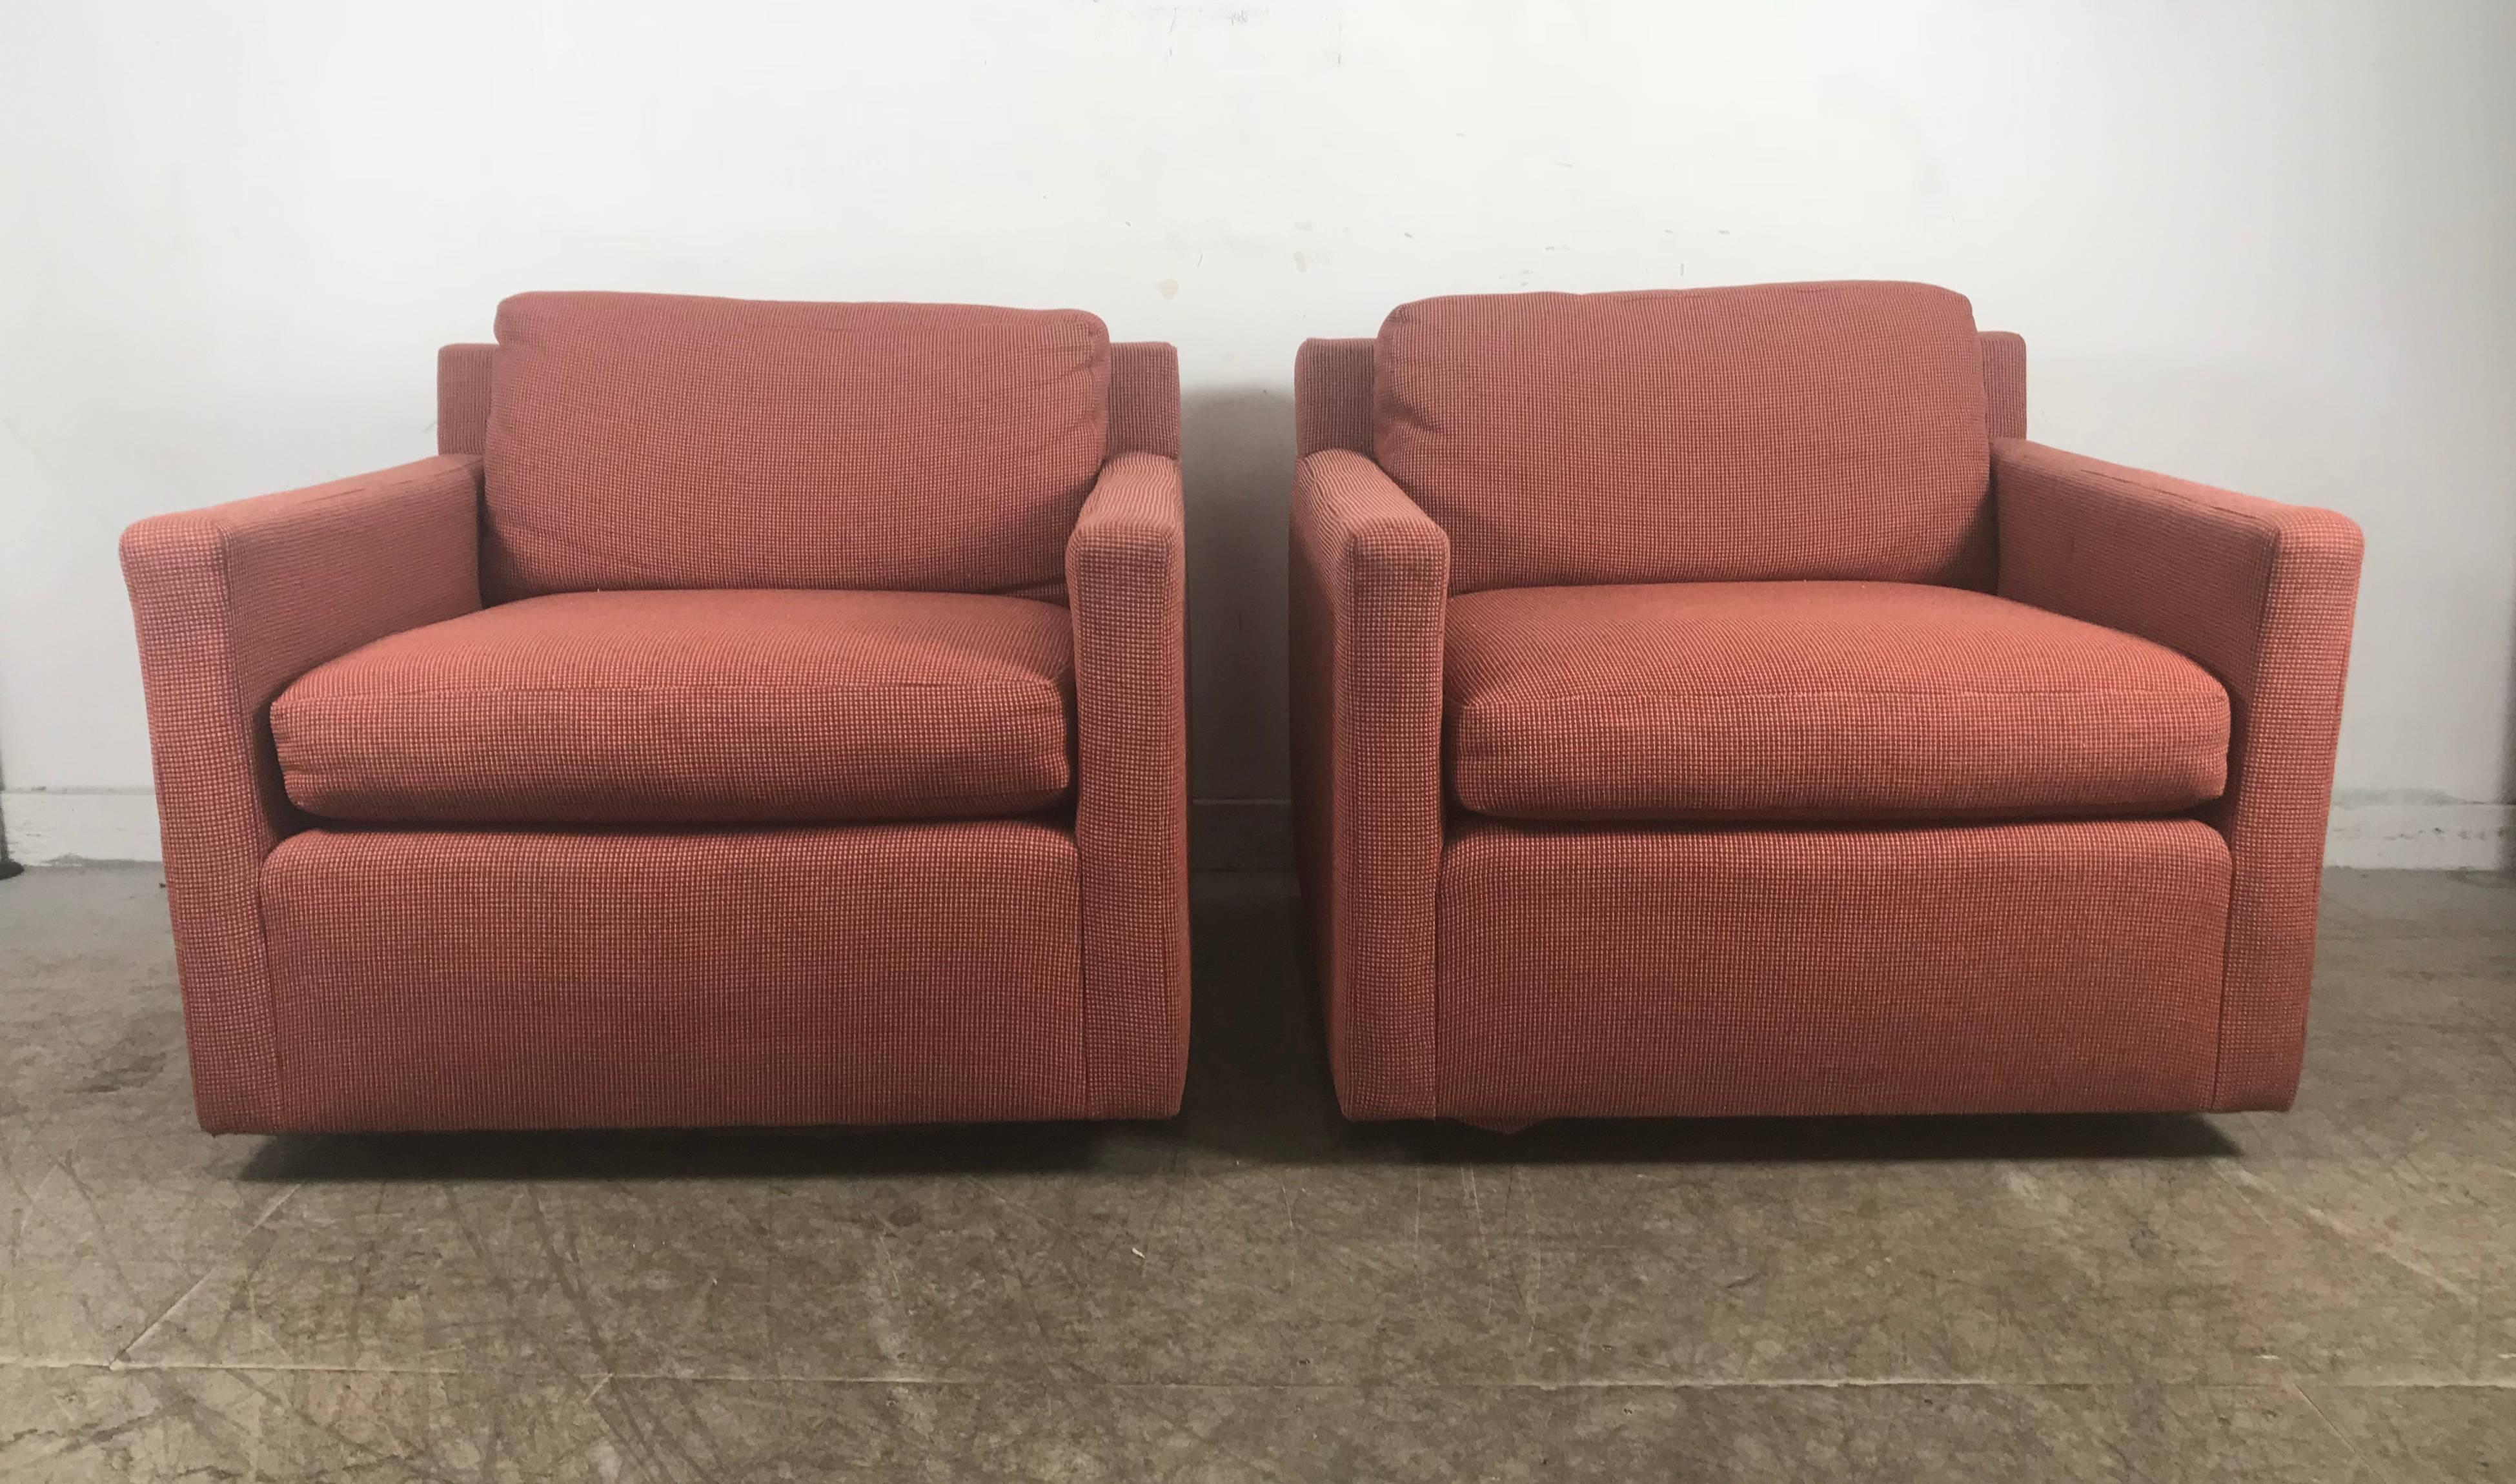 Stunning pair of cube lounge chairs attributed to Milo Baughman. Classic floating design. Black lacquer plinth base. Retains original orange or salmon wool fabric upholstery.